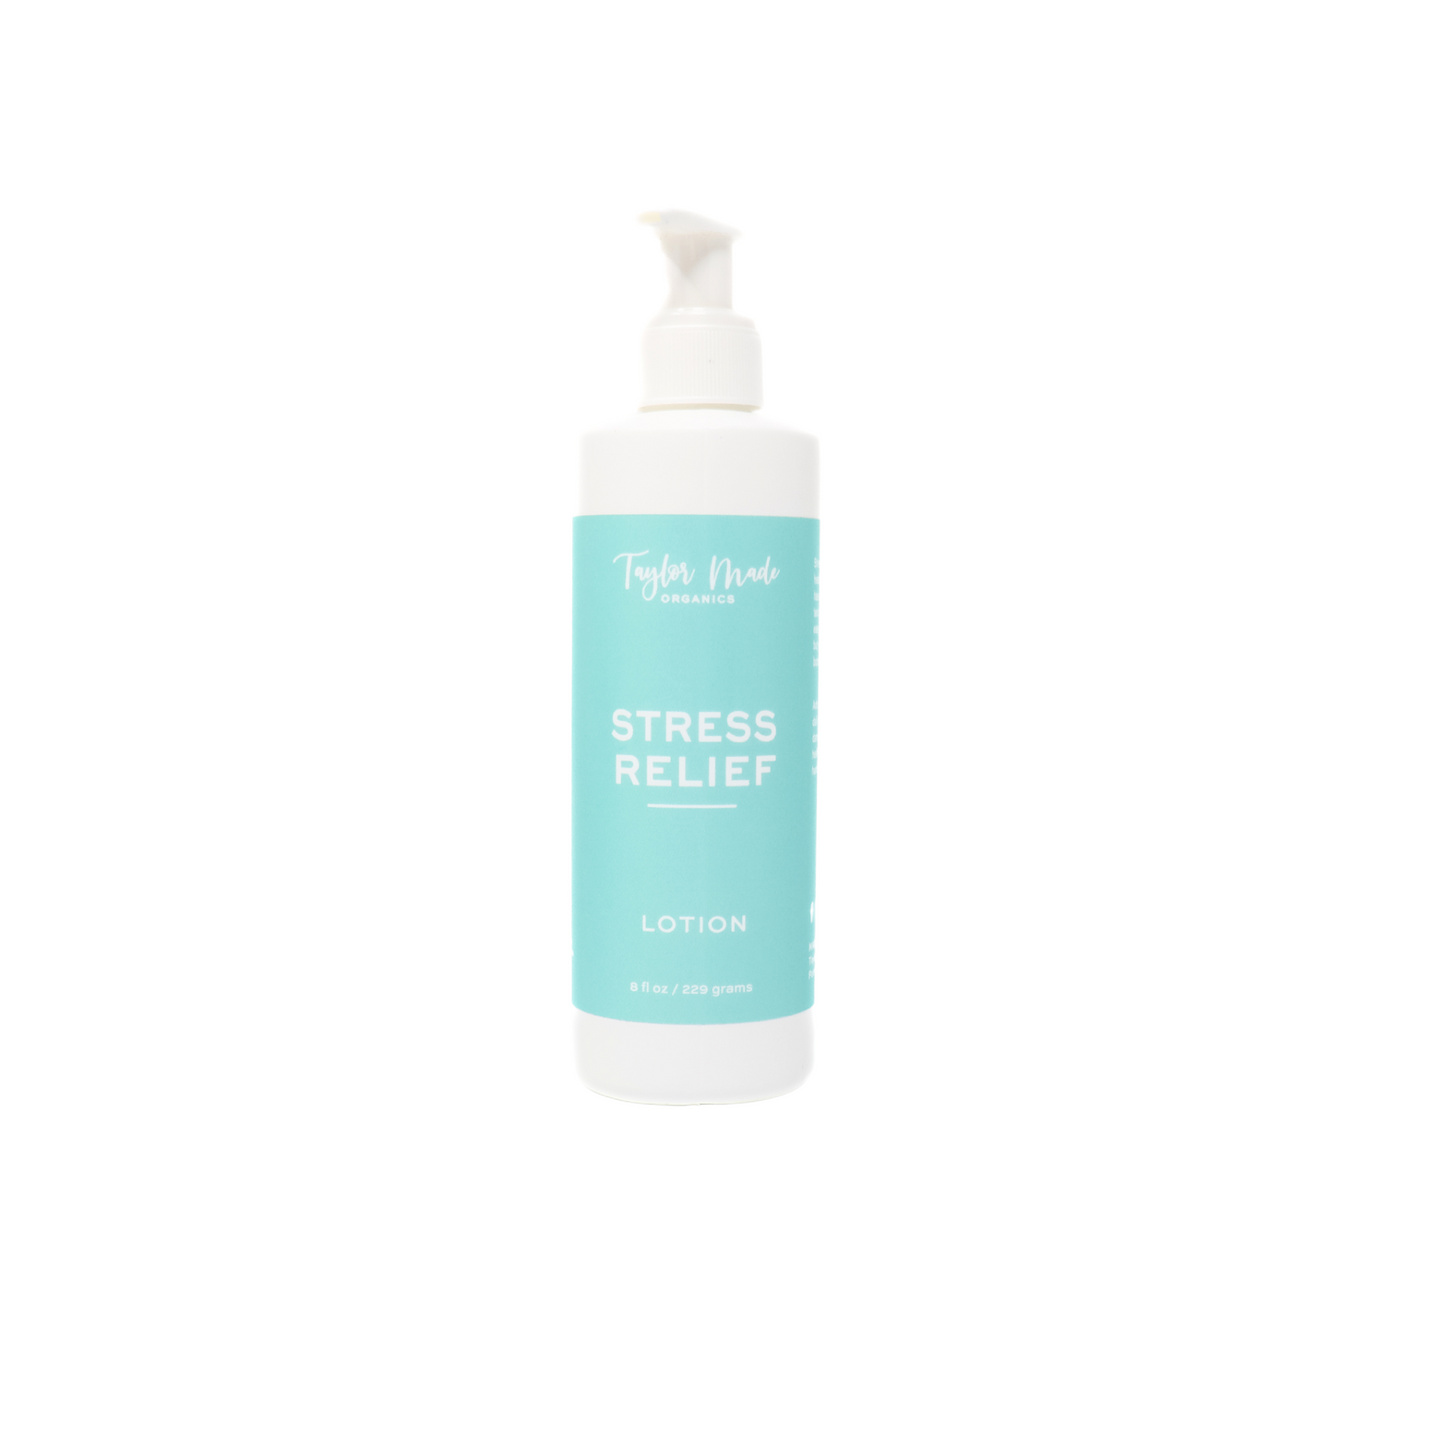 stress relief lotion | taylor made organics